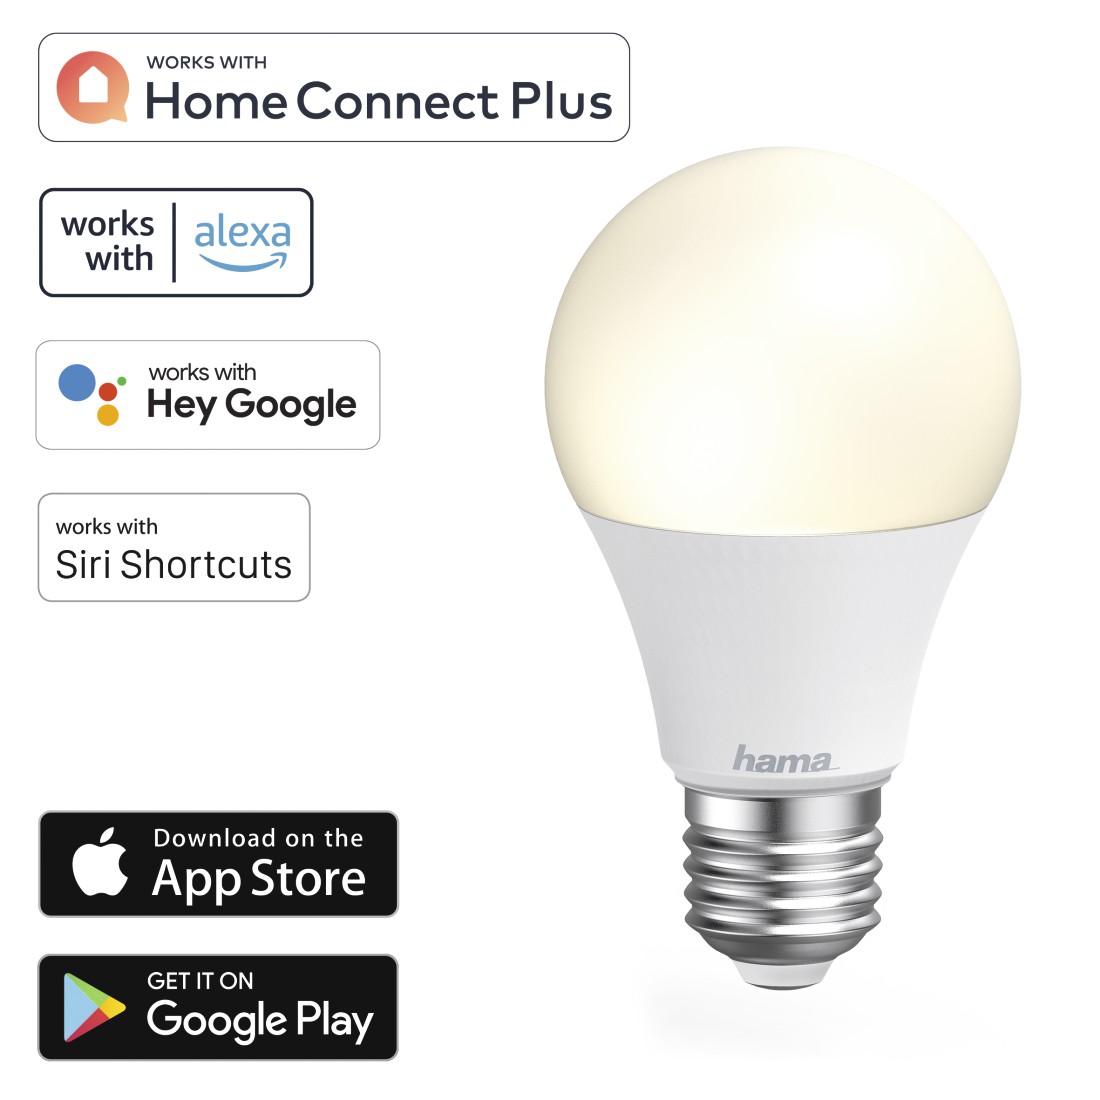 Hama 00176584 WLAN LED Lamp, E27, 10W, Dimmable, Bulb, for Voice / App Control, white